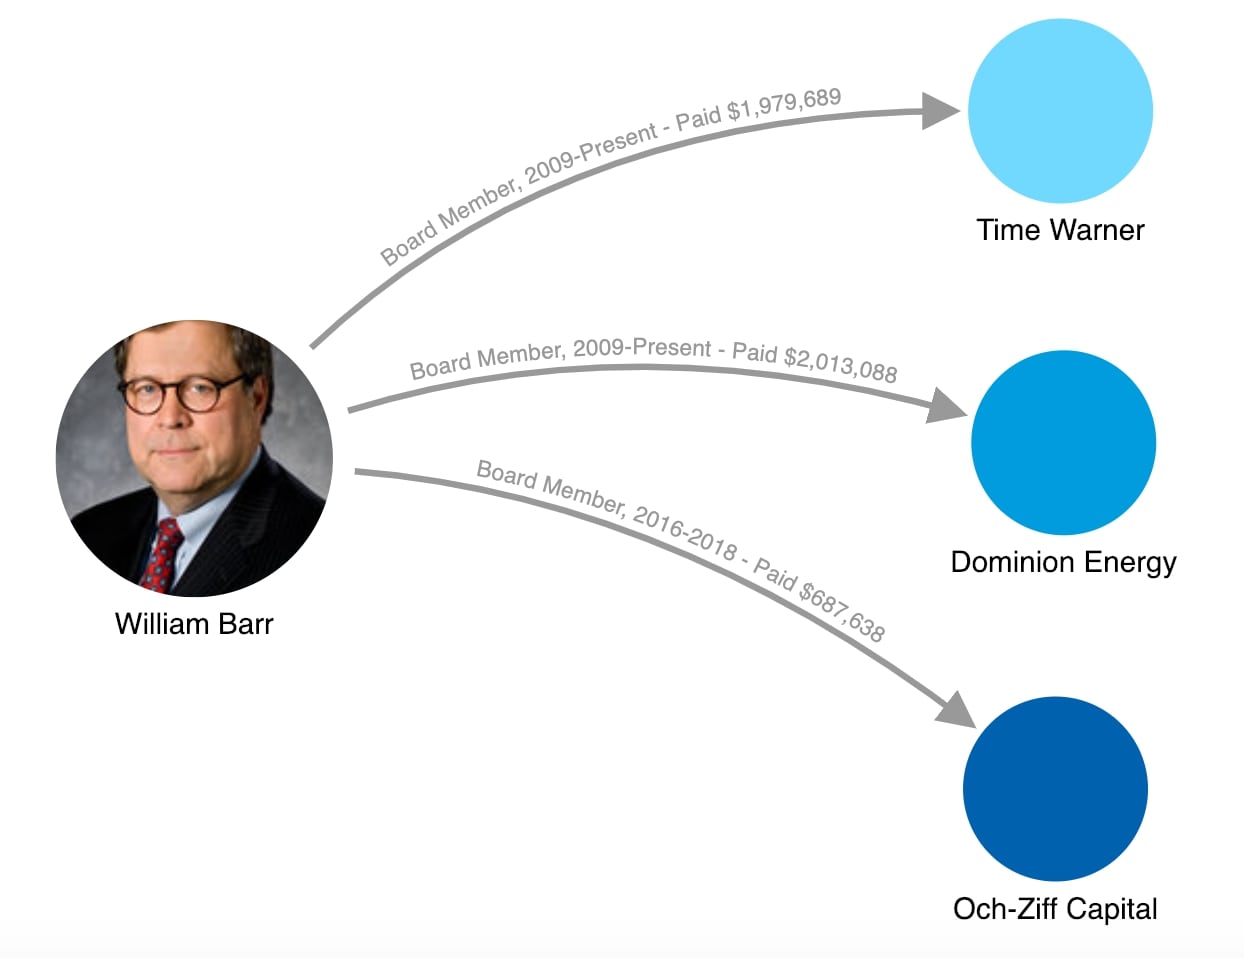 William Barr has profited handsomely from his corporate board memberships over the past decade.